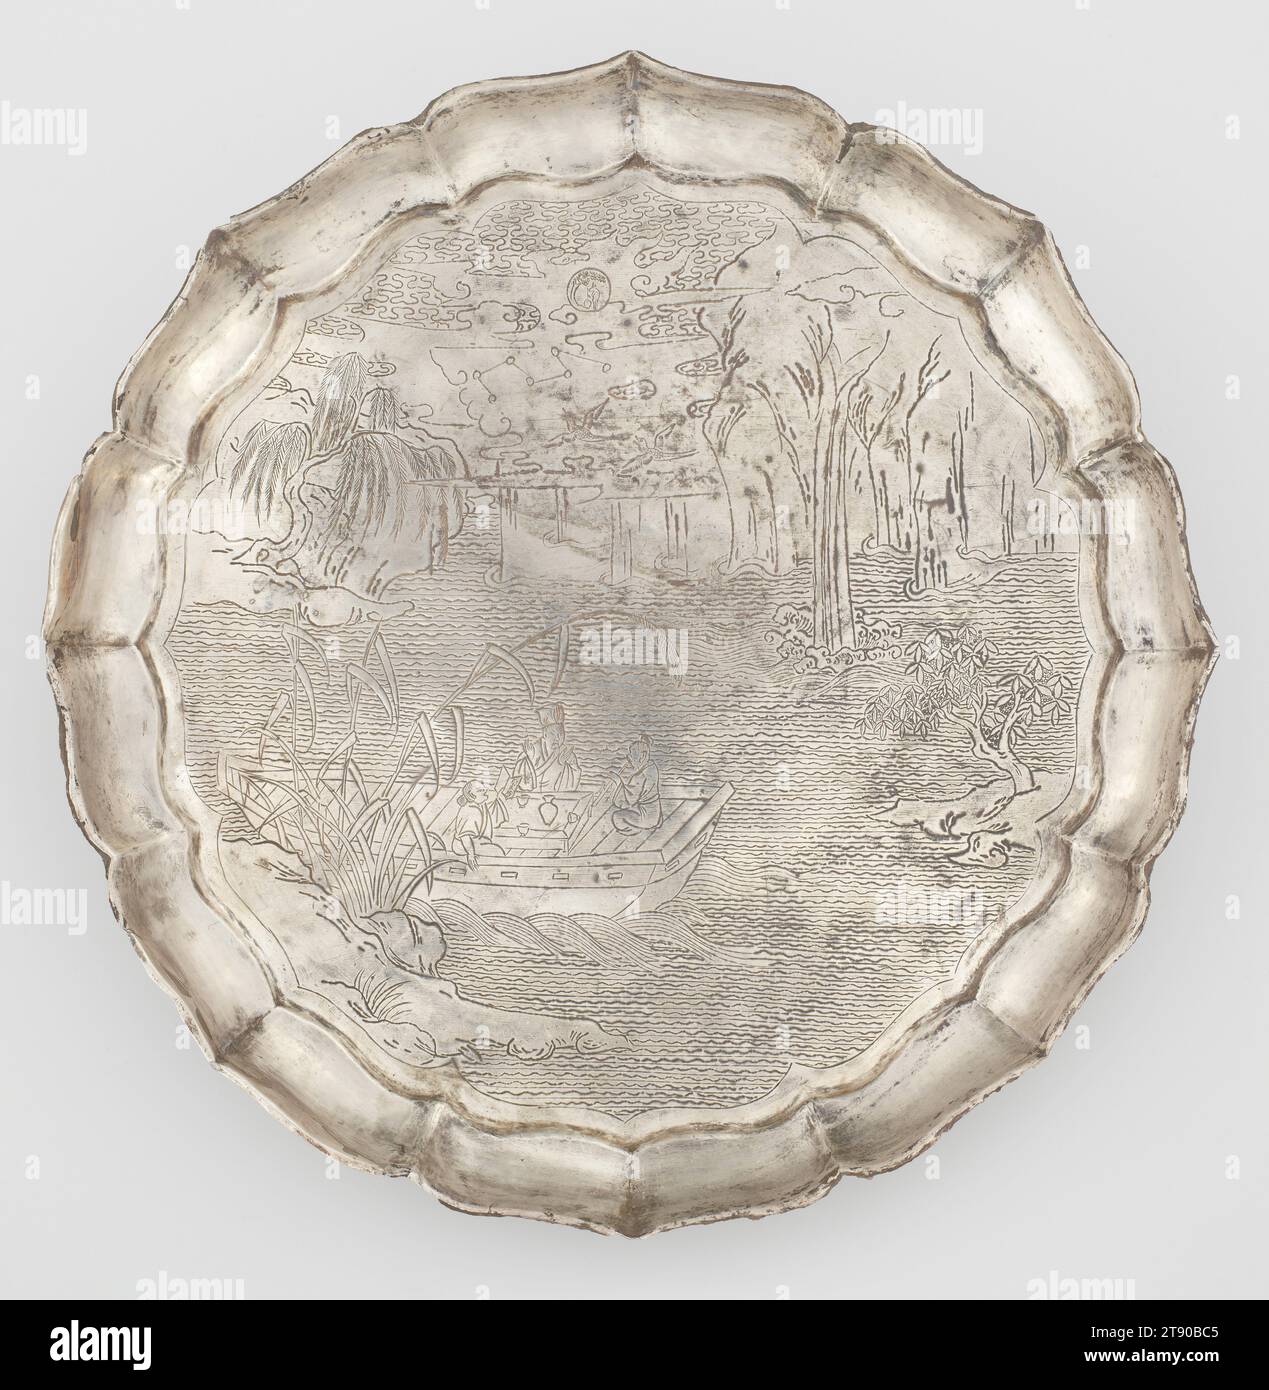 Silver plate decorated with chased 'Red Cliff' scene, 13th century, 7/8 x 10 5/16 x 10 5/16 in. (2.22 x 26.19 x 26.19 cm), Silver, China, 13th century, Framed by an elegant foliate rim, the pictorial scene from the 'Former Red Cliff Ode' by Su Shi (1037–1101) shows him with two companions boating beneath the Red Cliff, a famous ancient battle site along the Yangzi River. A wine pot and cups are set before them. They read poetry and play music as the boat drifts idyllically beside a rocky embankment covered with grasses, and a waterfall spills down from the high cliffs at the far shore. Stock Photo